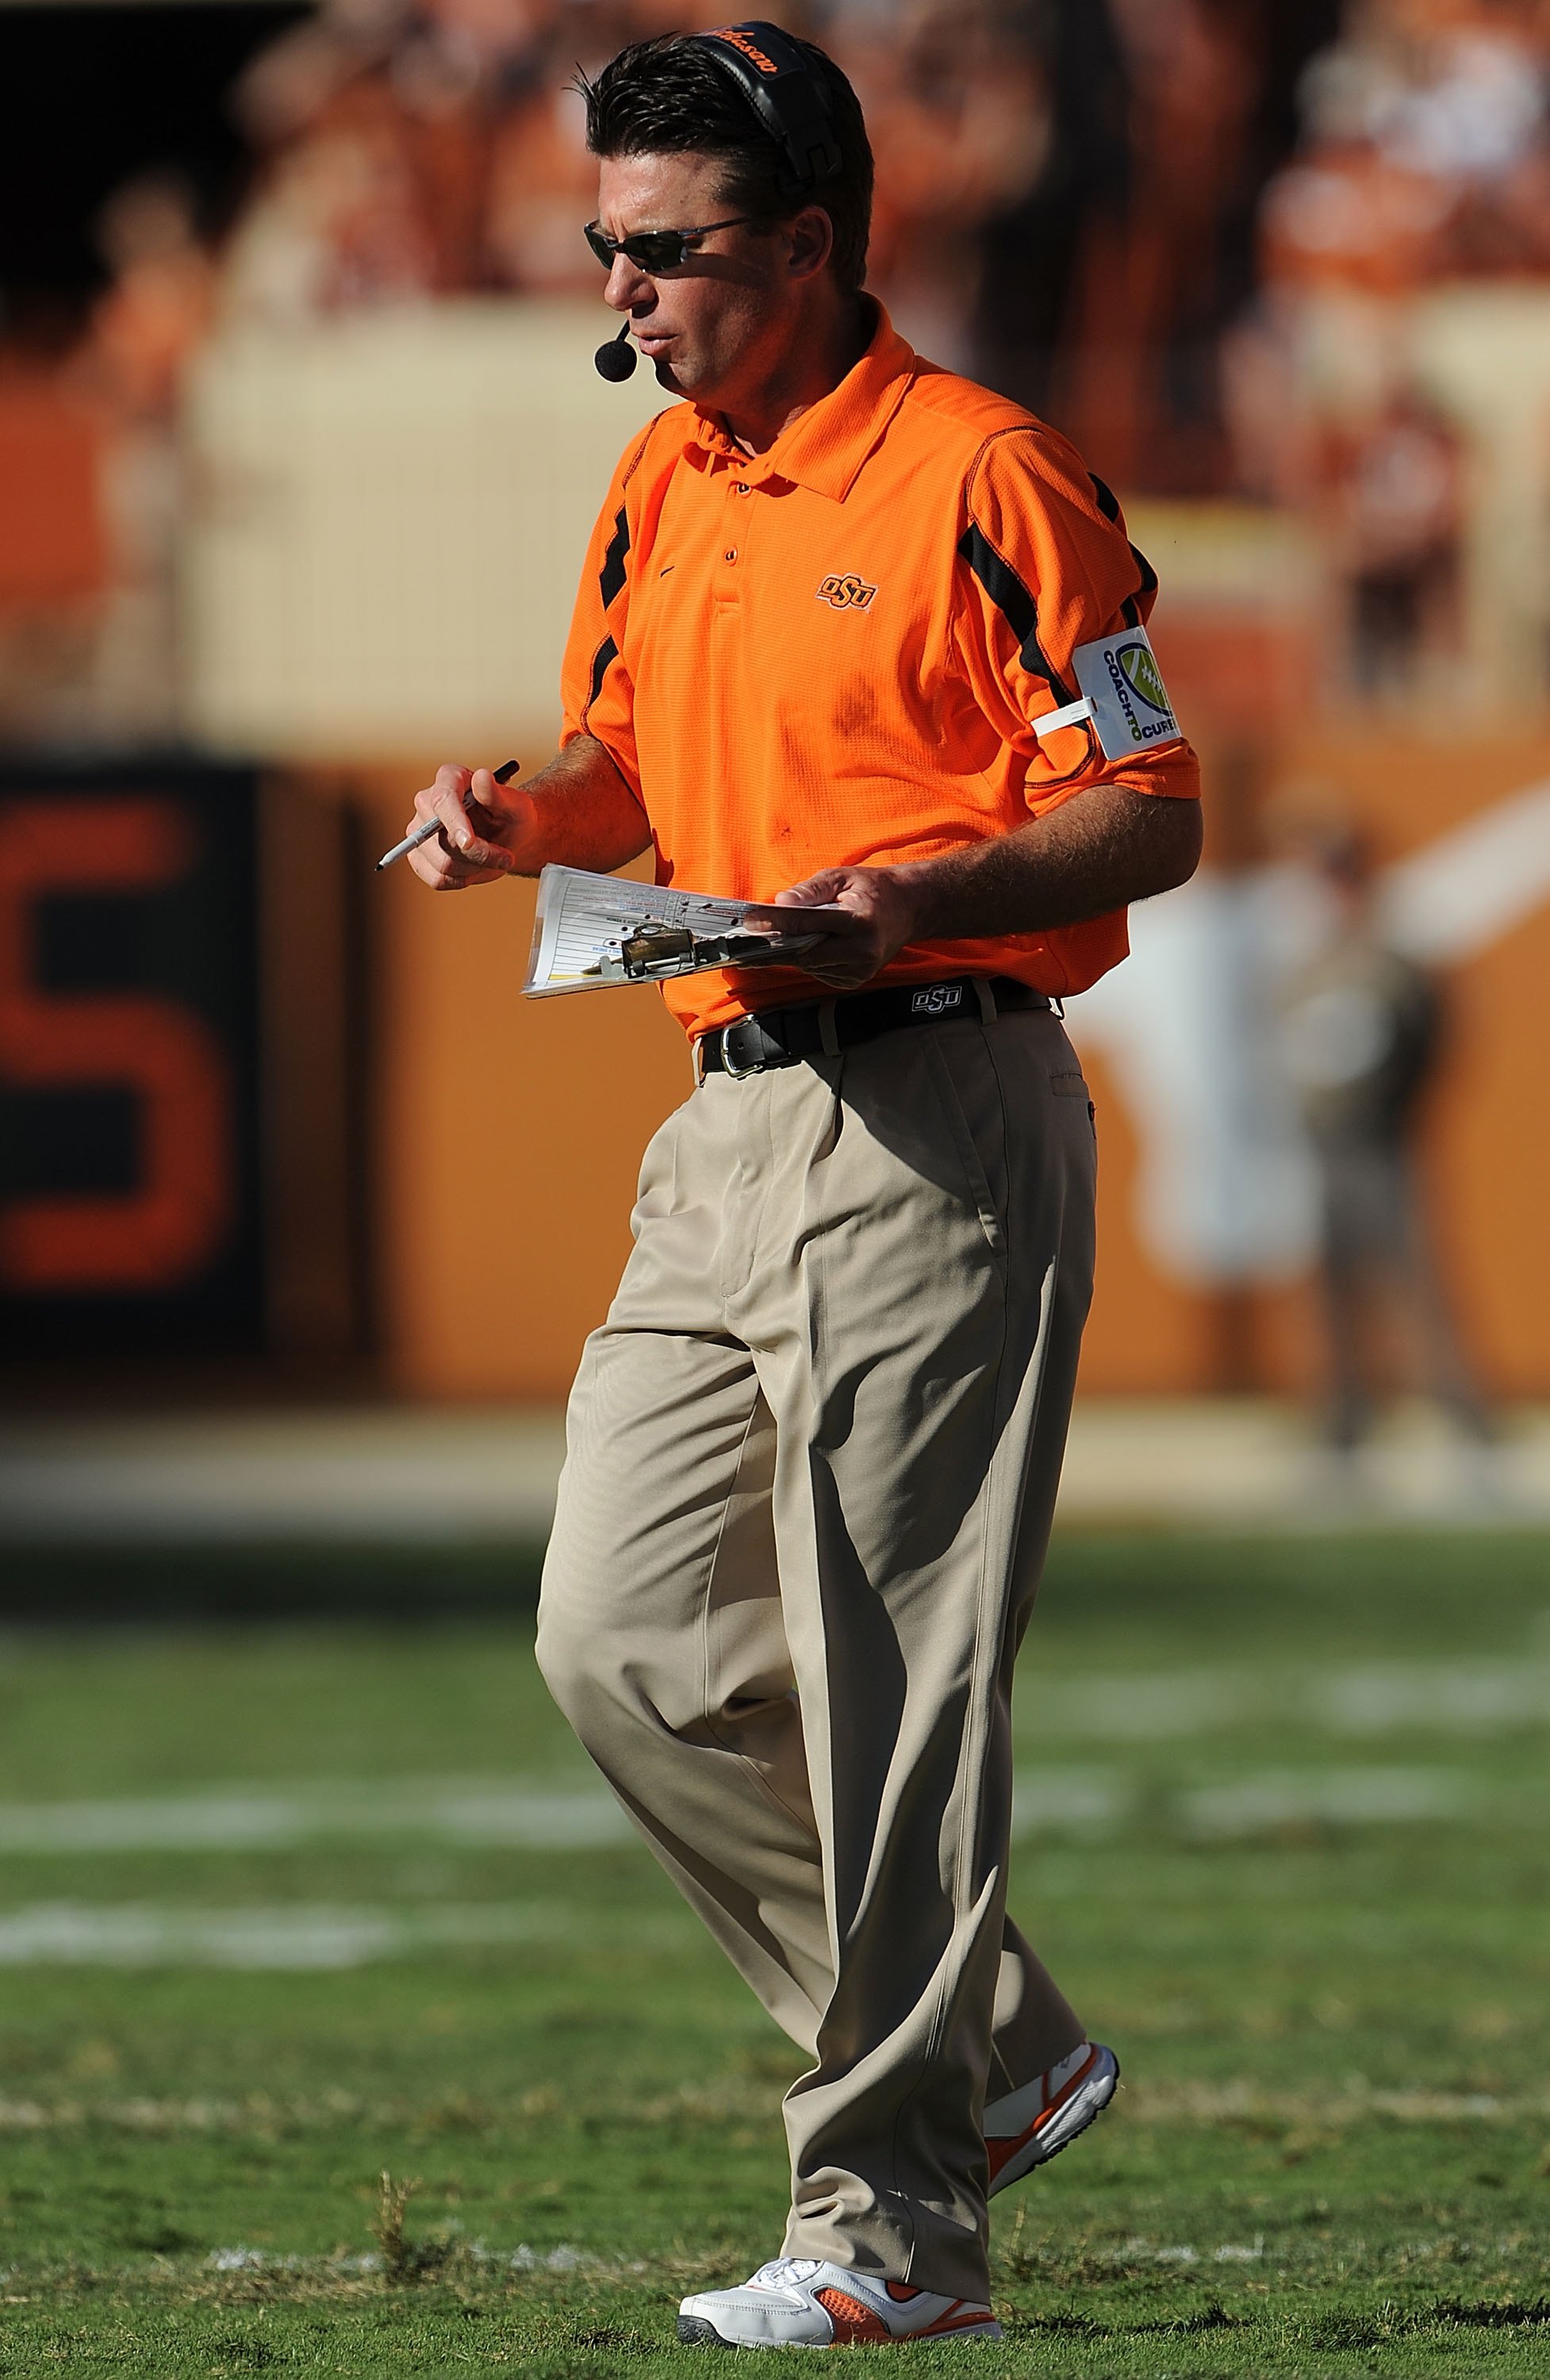 AUSTIN, TX - OCTOBER 25:  Head coach Mike Gundy of the Oklahoma State Cowboys during play against the Texas Longhorns at Texas Memorial Stadium on October 25, 2008 in Austin, Texas.  (Photo by Ronald Martinez/Getty Images)